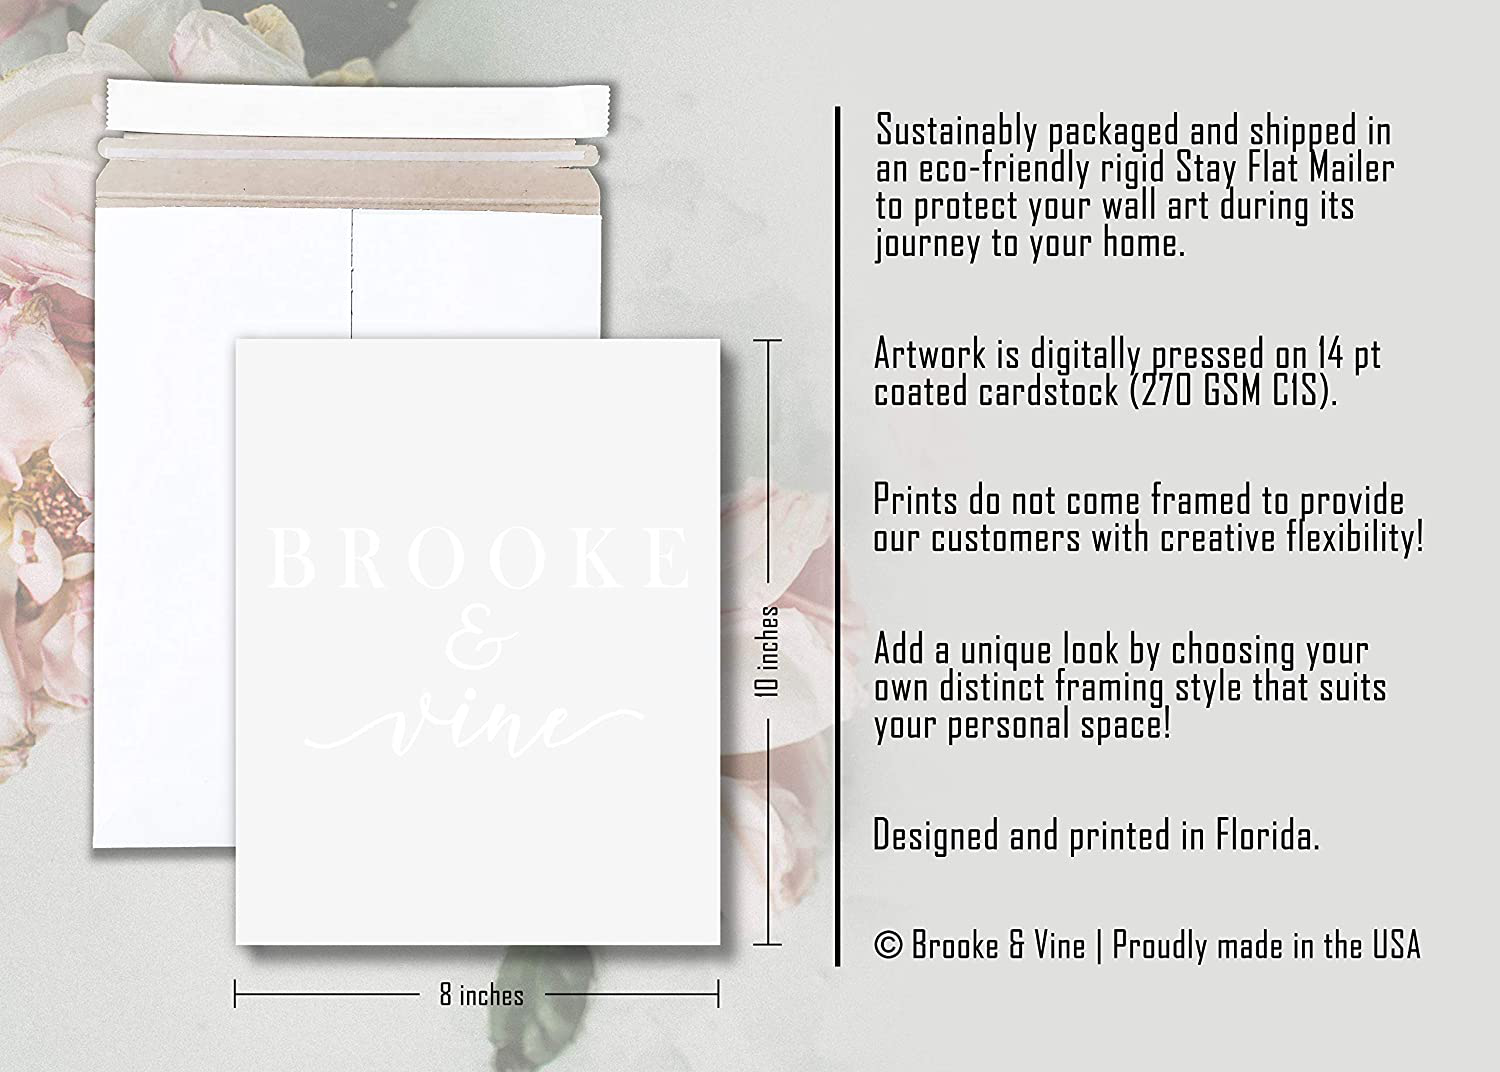 Brooke & Vine Girl Room Wall Decor Art Prints - (UNFRAMED 8 x 10) Inspirational Wall Art, Motivational Quotes Posters for Kids, Tween Bedroom (Braver Than You Believe - Gold and White)